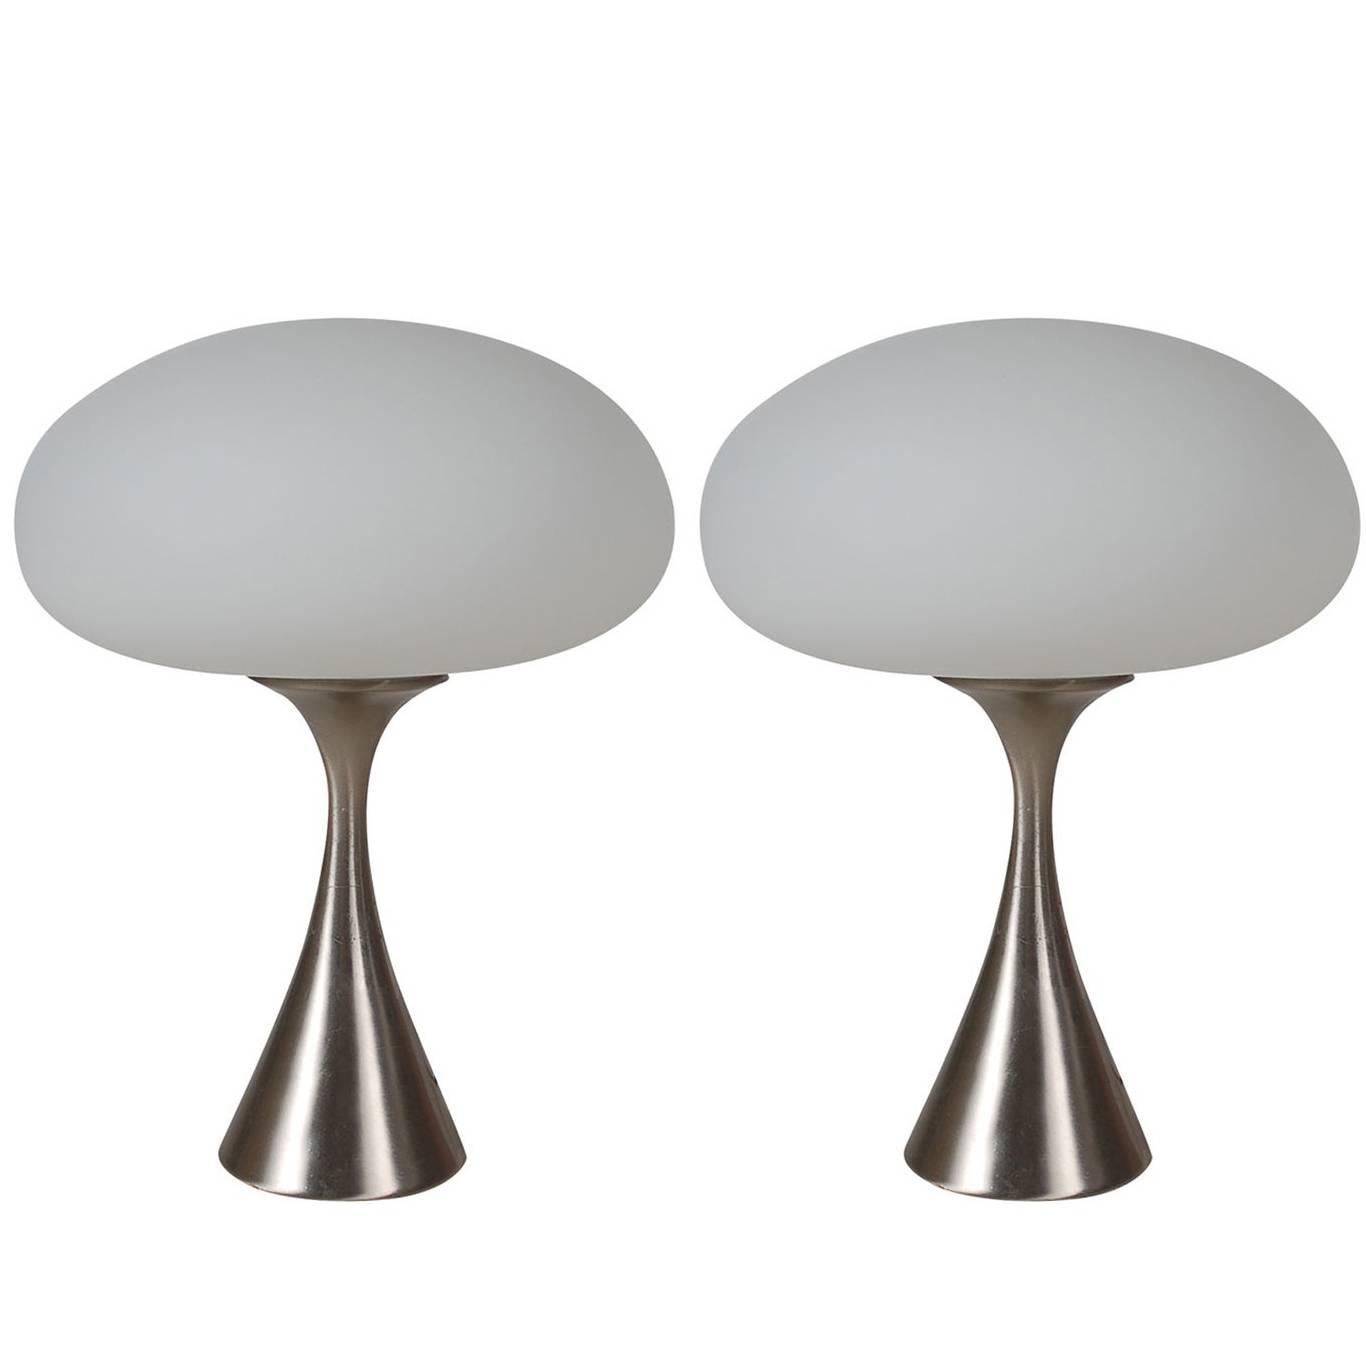 Mid-Century Modern Glass & Silver Mushroom Table Lamps by Laurel Lamp Company